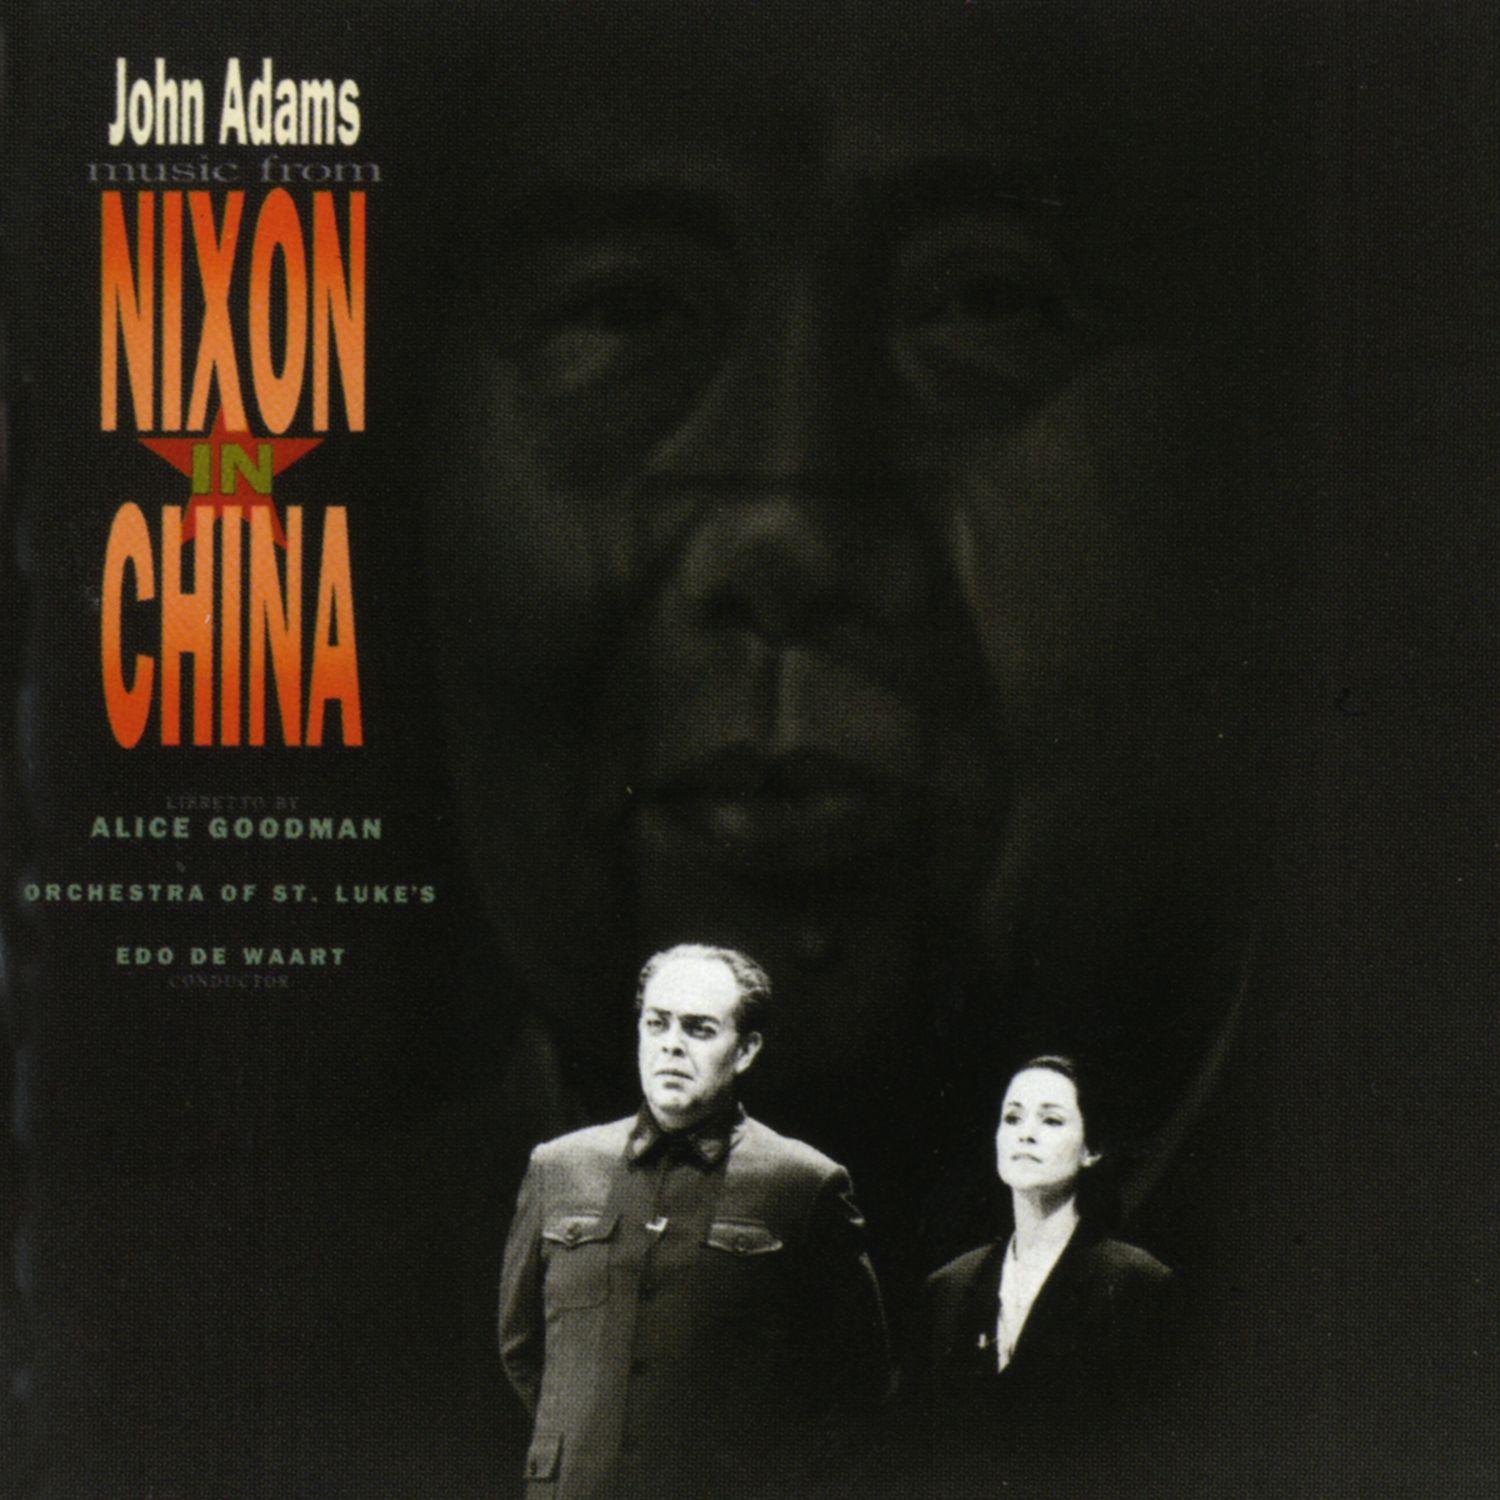 Nixon in China, Act I, Scene 1:"The People Are the Heroes Now"